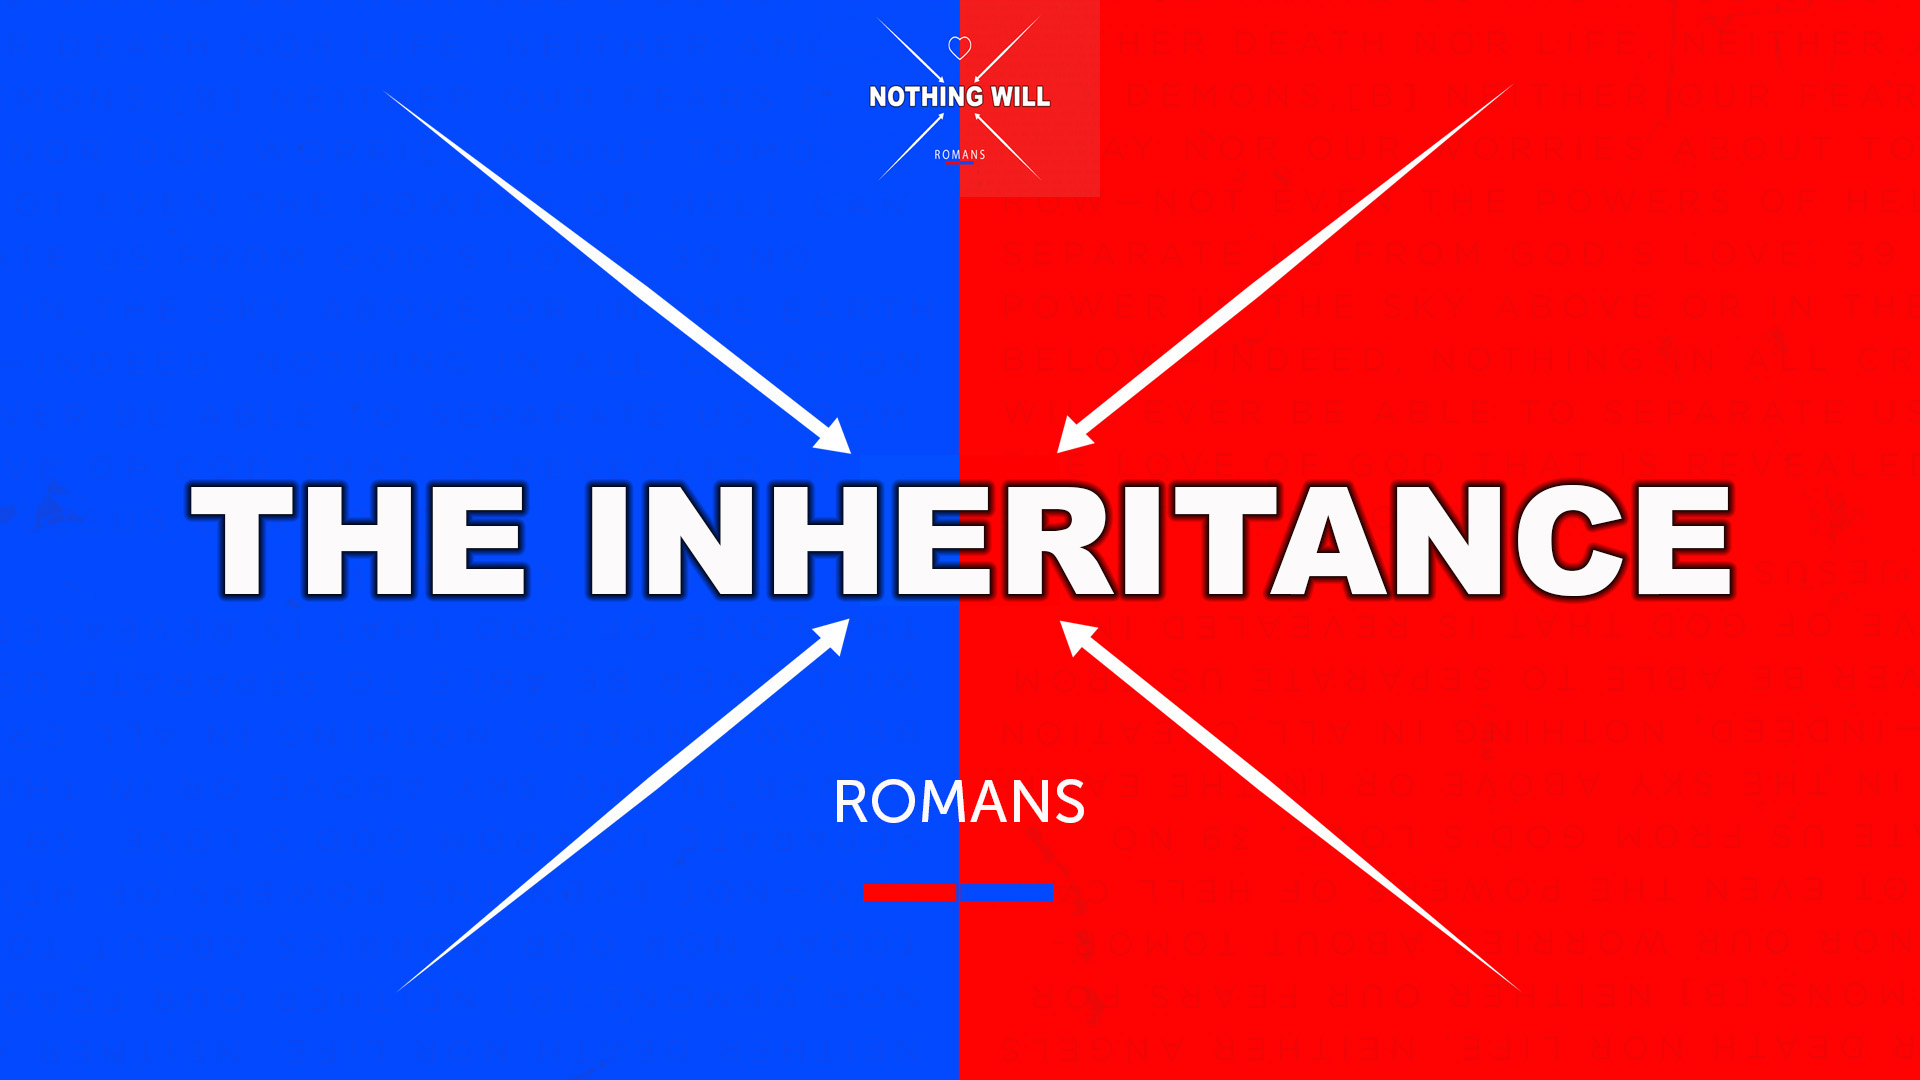 Pastor Huey: Romans | Nothing Will | The Inheritance (03/06/16)